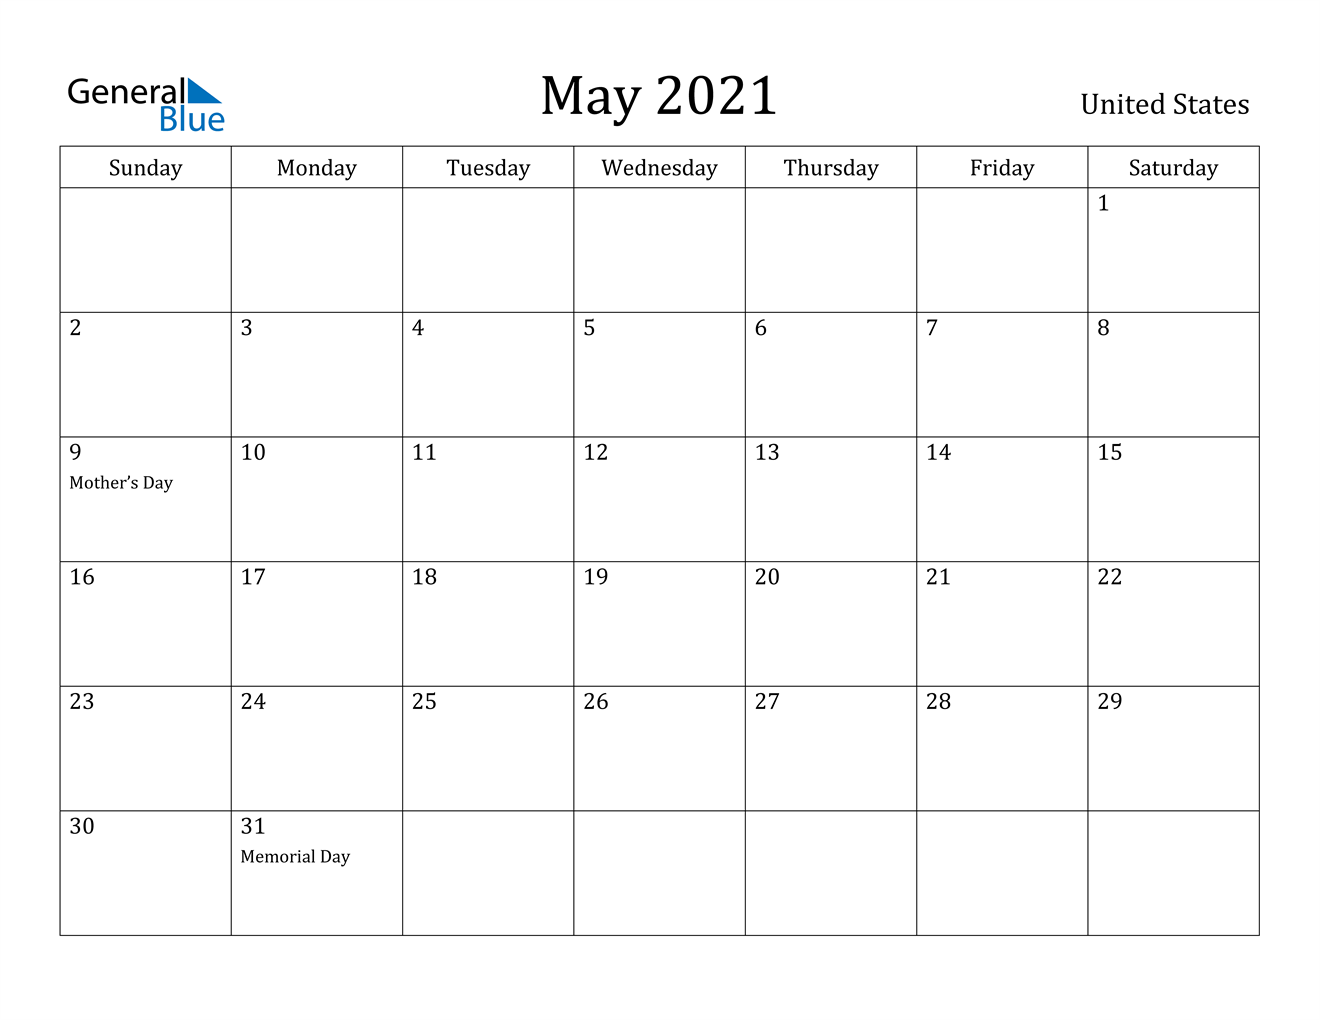 United States May 2021 Calendar with Holidays